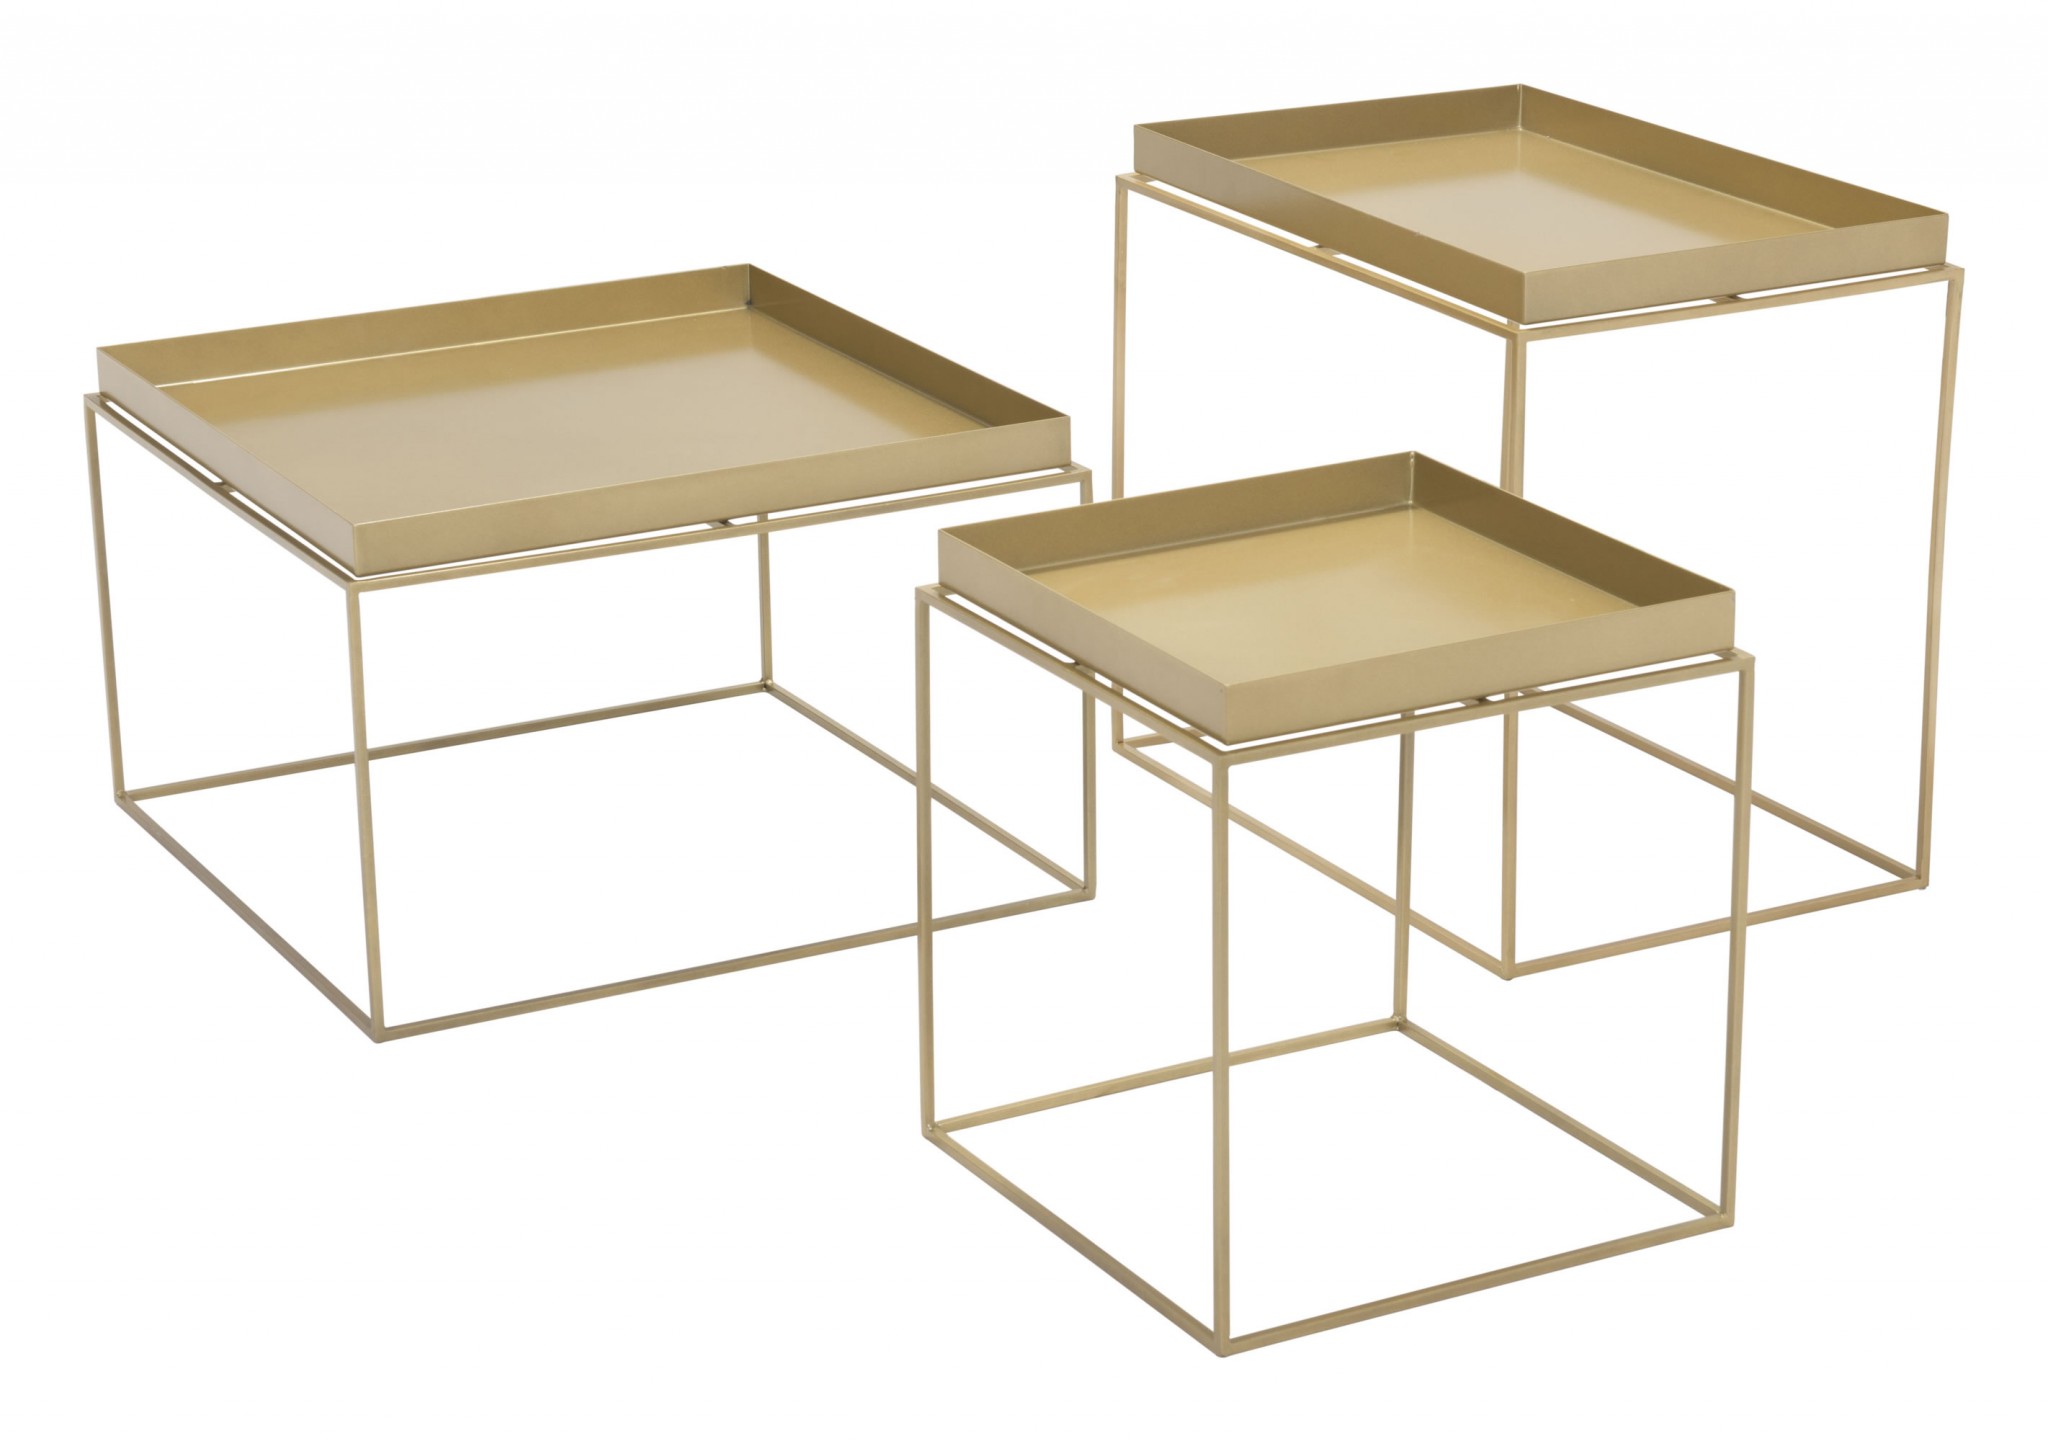 23.6" x 23.6" x 15.7" Gold, Steel, Nesting Table